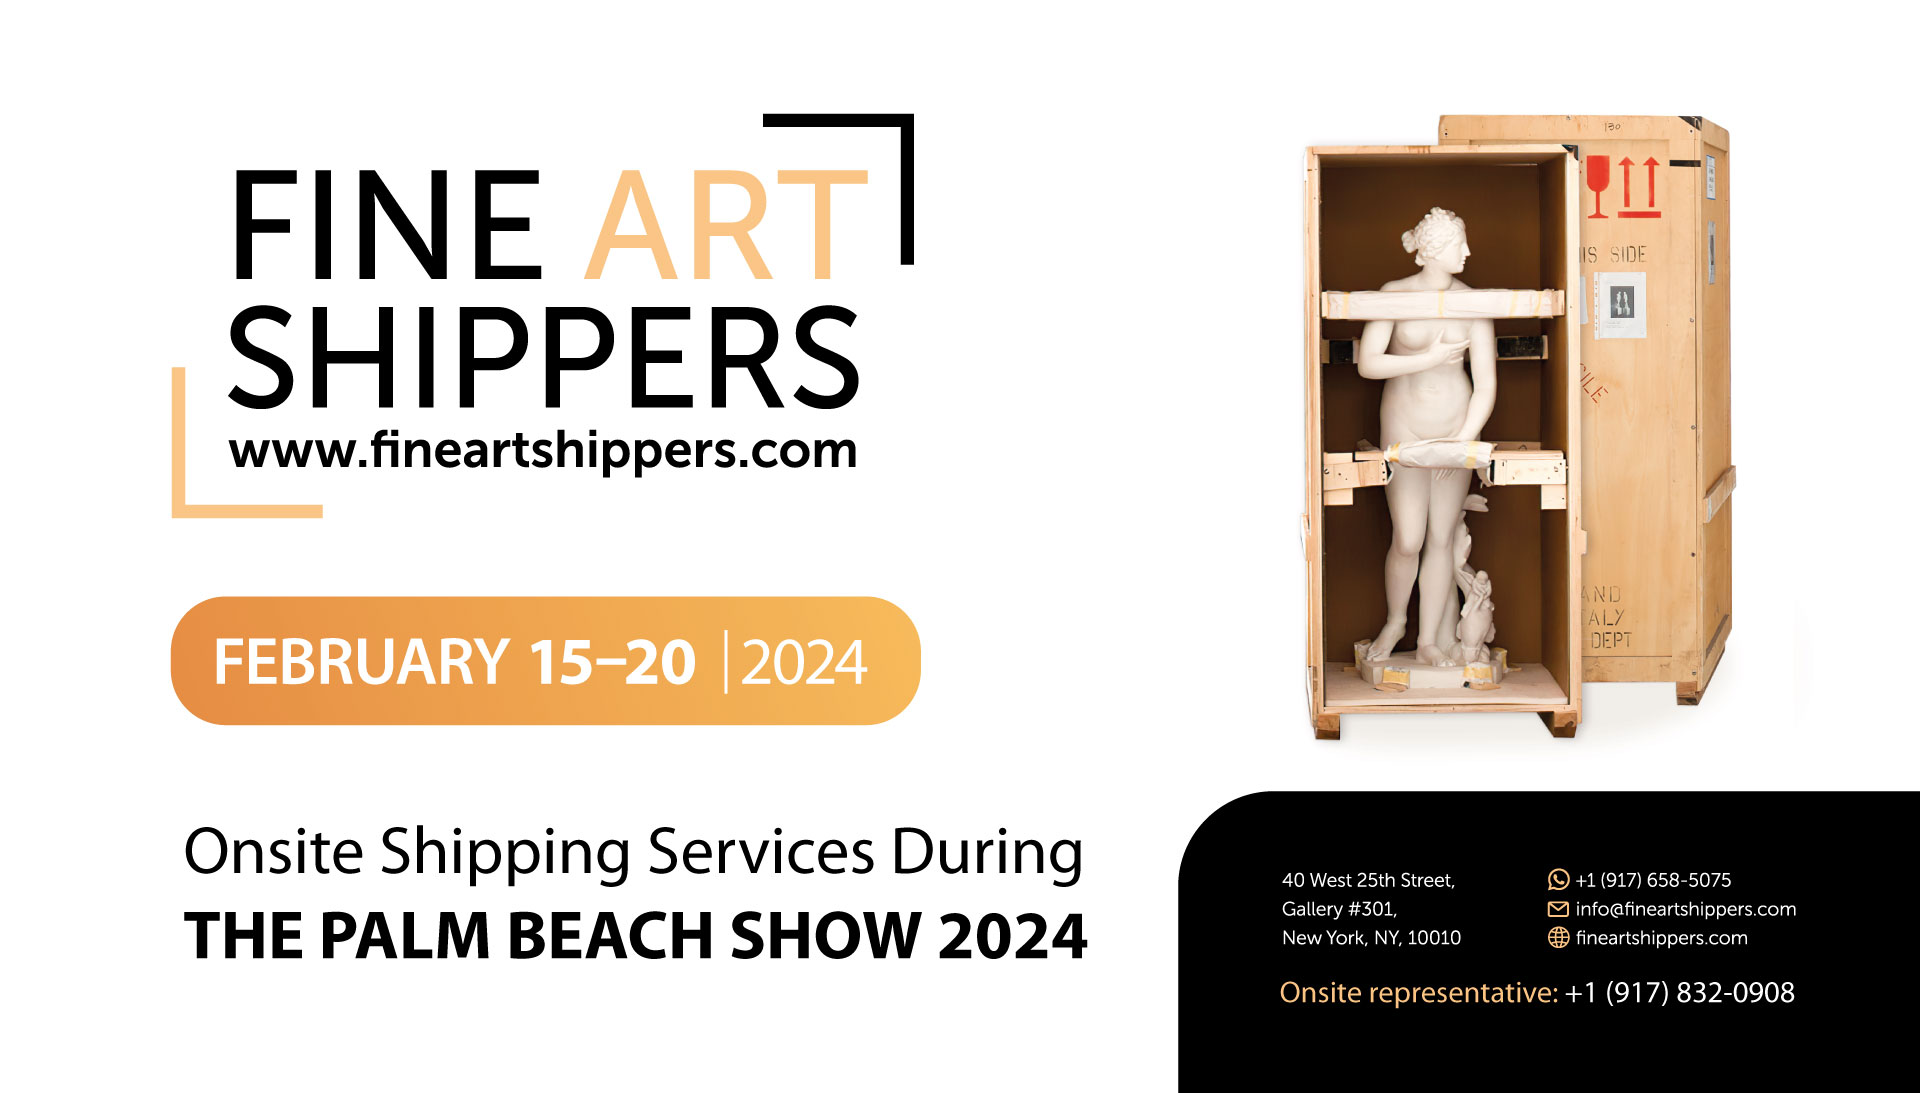 Fine Art Shippers Is an Onsite Shipper at The Palm Beach Show 2024